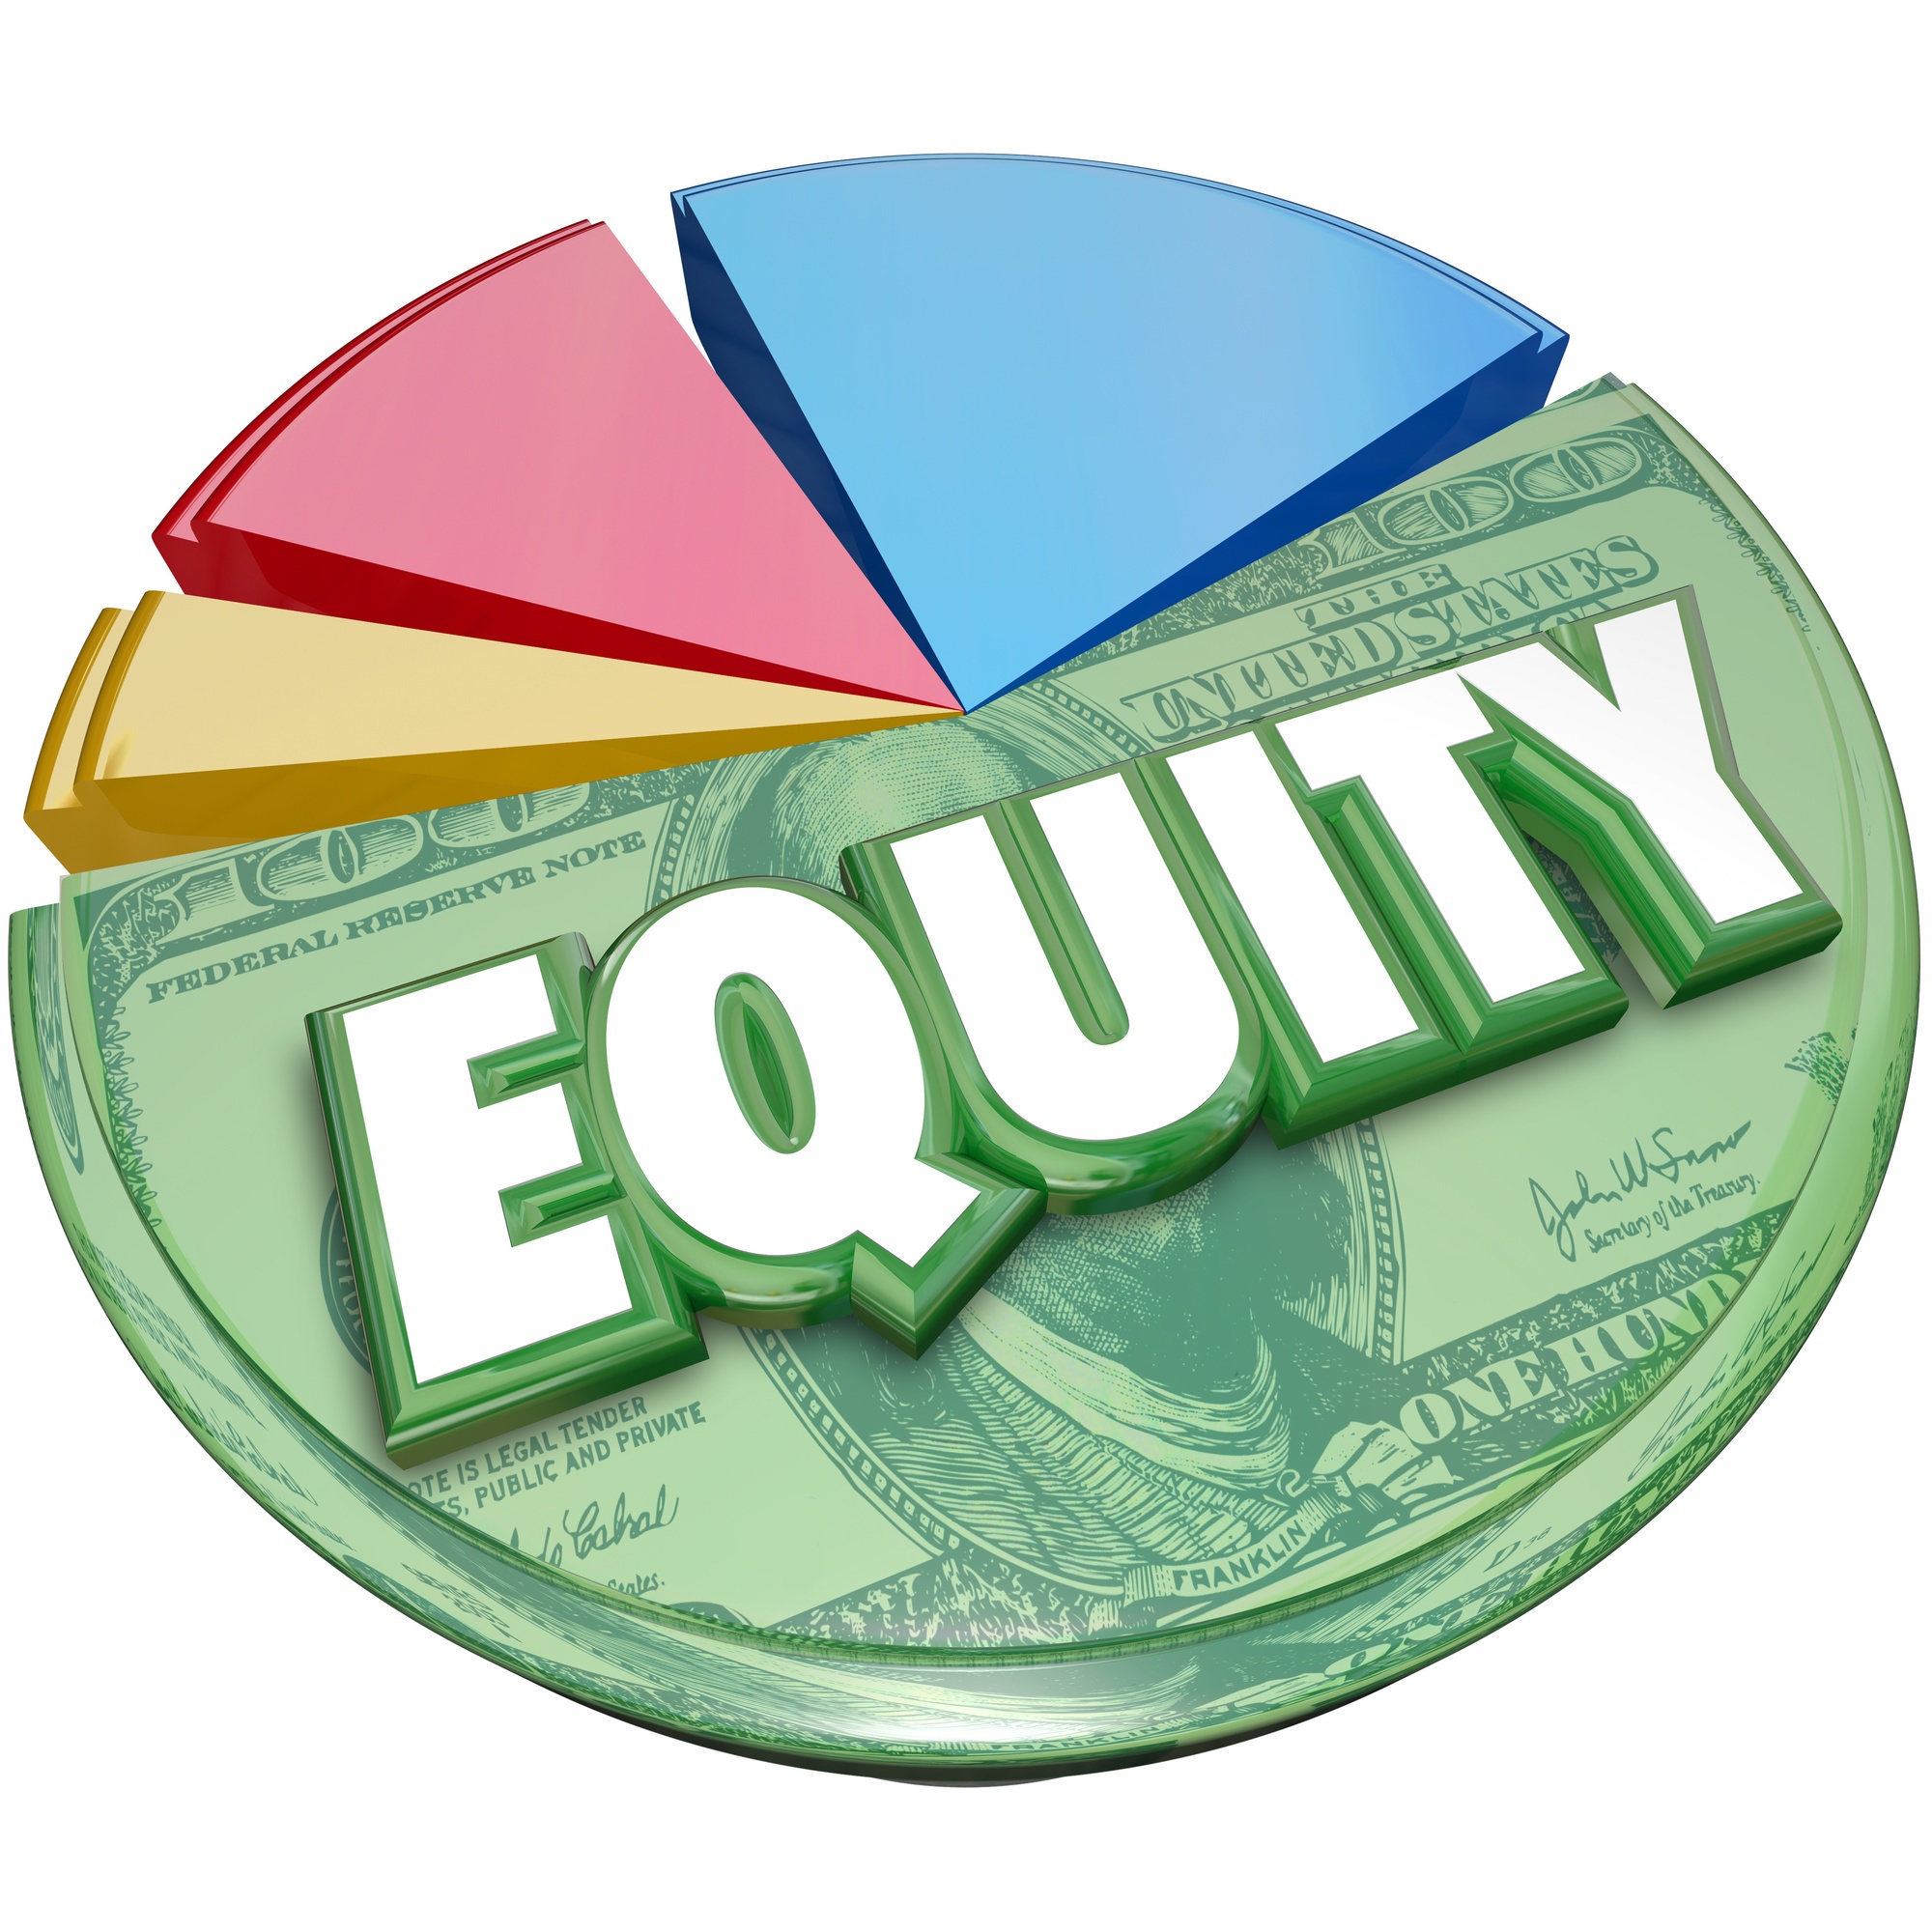 Equity in Your Business